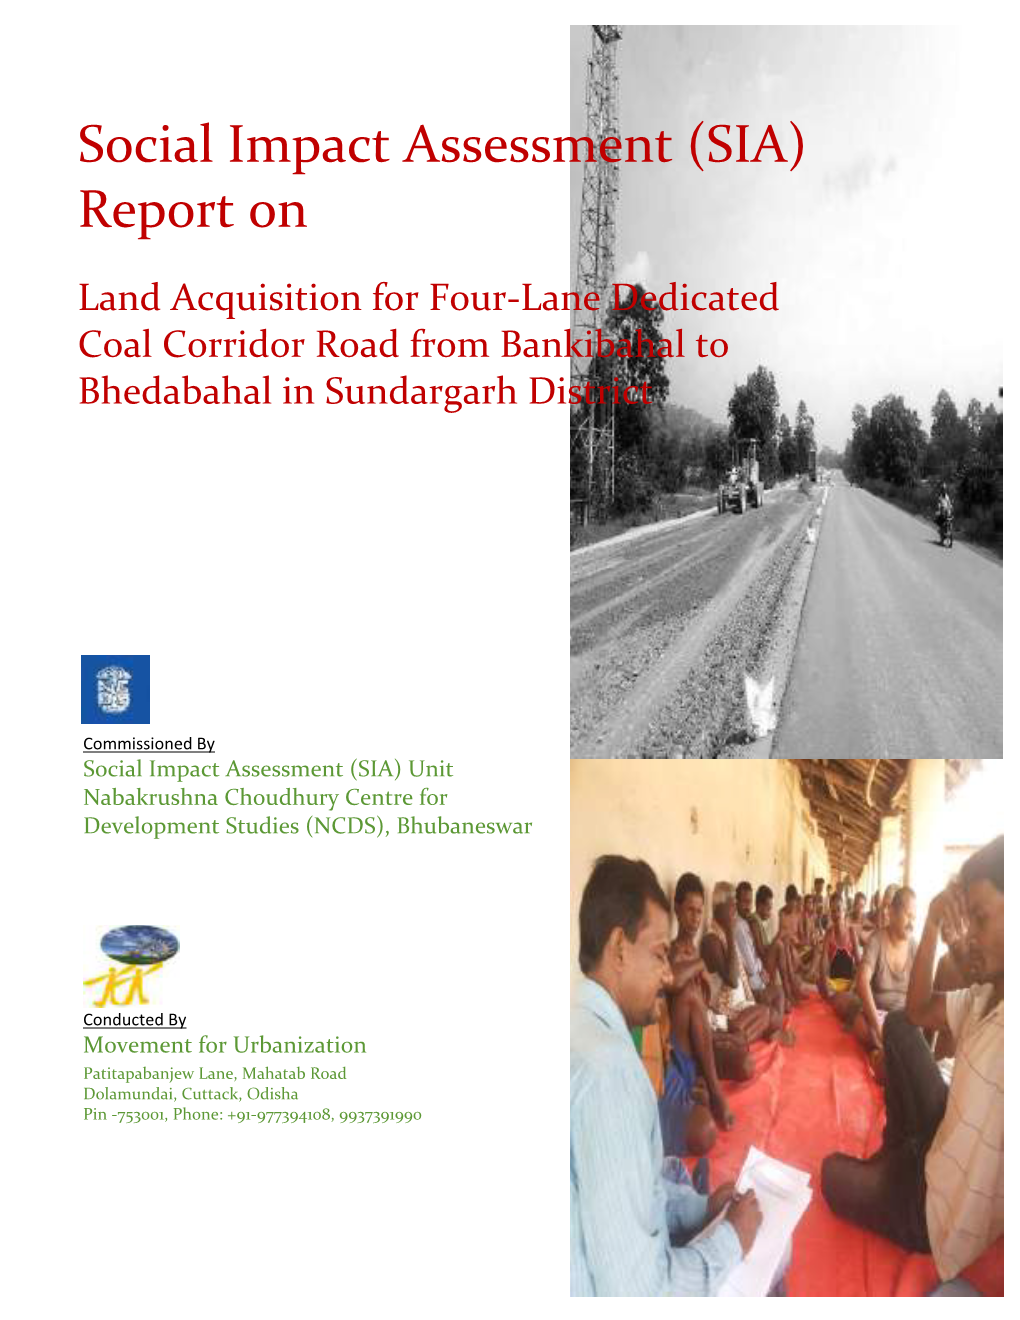 Social Impact Assessment (SIA) Report on Land Acquisition for Four-Lane Dedicated Coal Corridor Road from Bankibahal to Bhedabahal in Sundargarh District